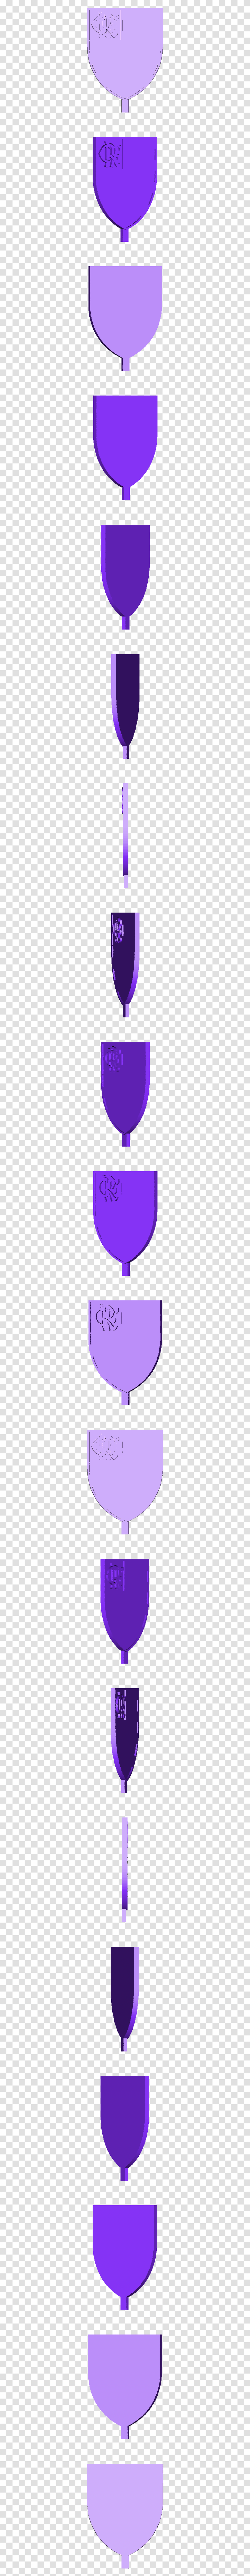 Wine Glass, Ball, Balloon, Vehicle Transparent Png